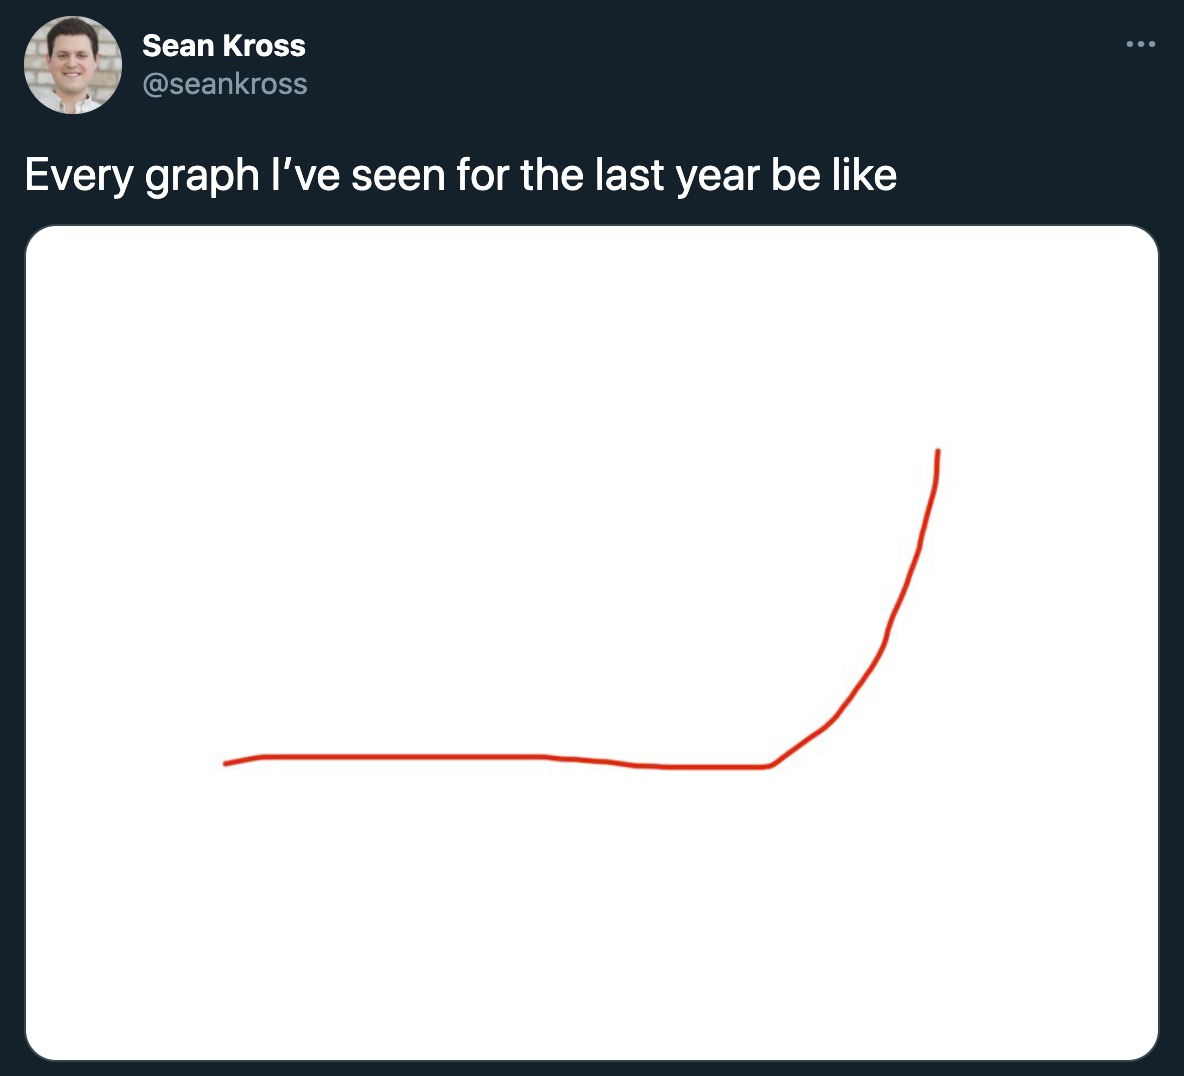 funny twitter jokes and memes - Every graph I've seen for the last year be like